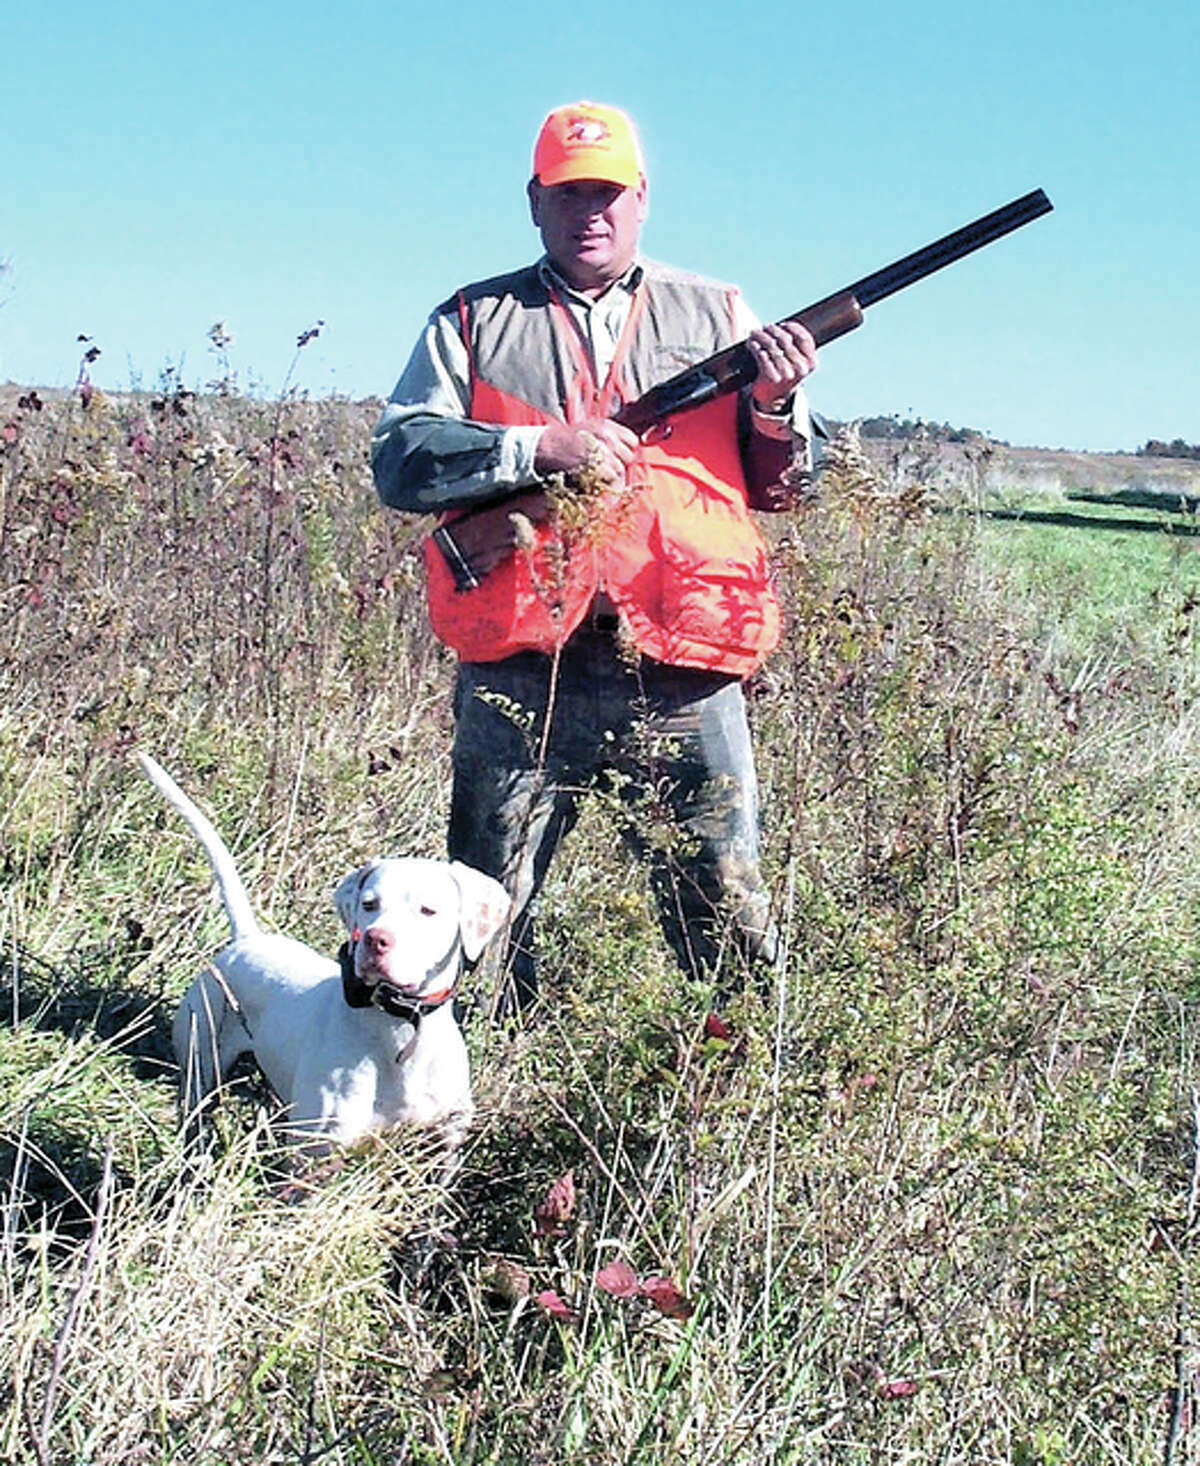 Upland game hunting begins Nov. 7 with the opener for the rabbit and quail seasons. Experts feel hunters will need to find quality habitat in order to enjoy good success.